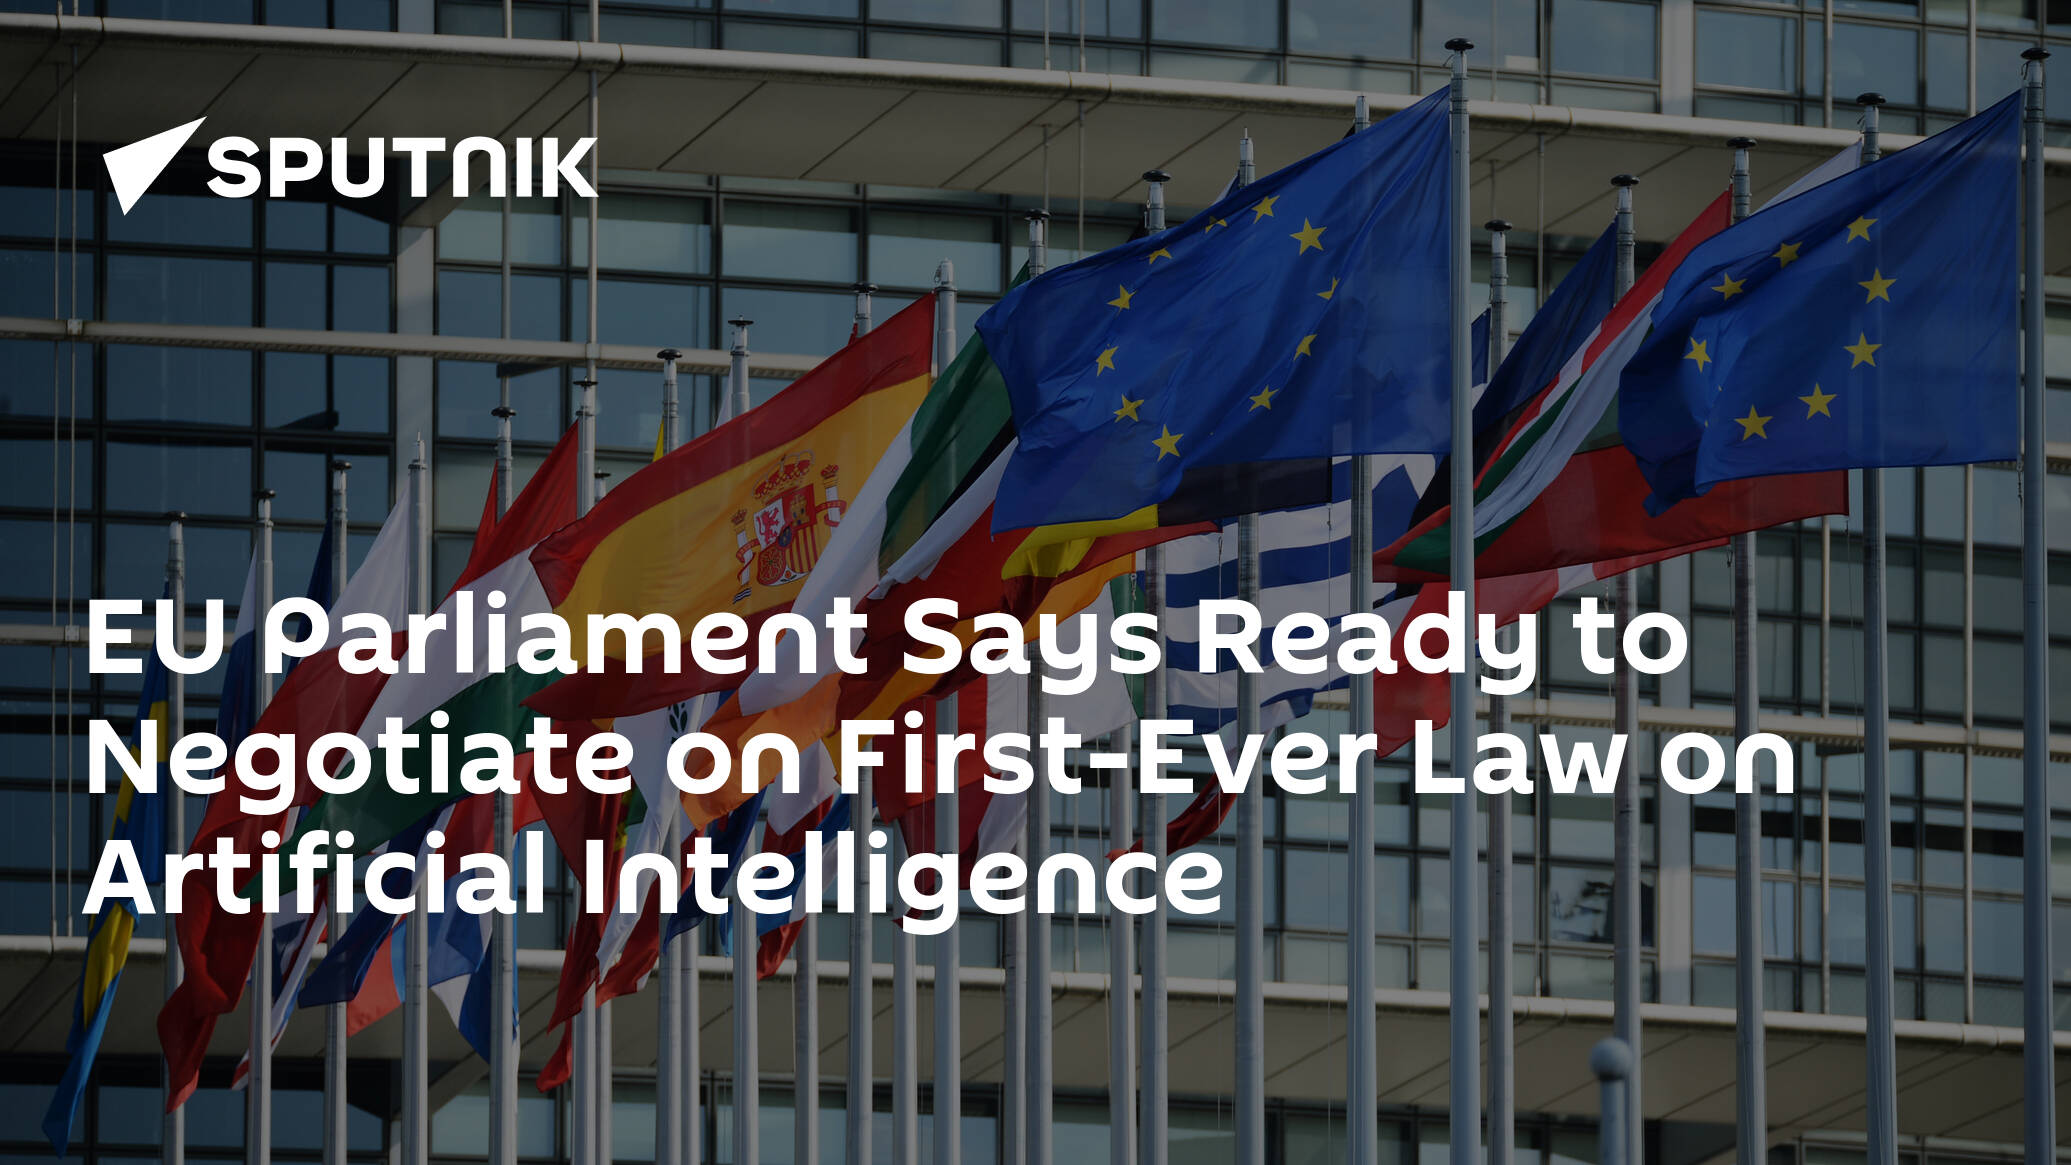 EU Parliament Says Ready to Negotiate on First-Ever Law on Artificial Intelligence